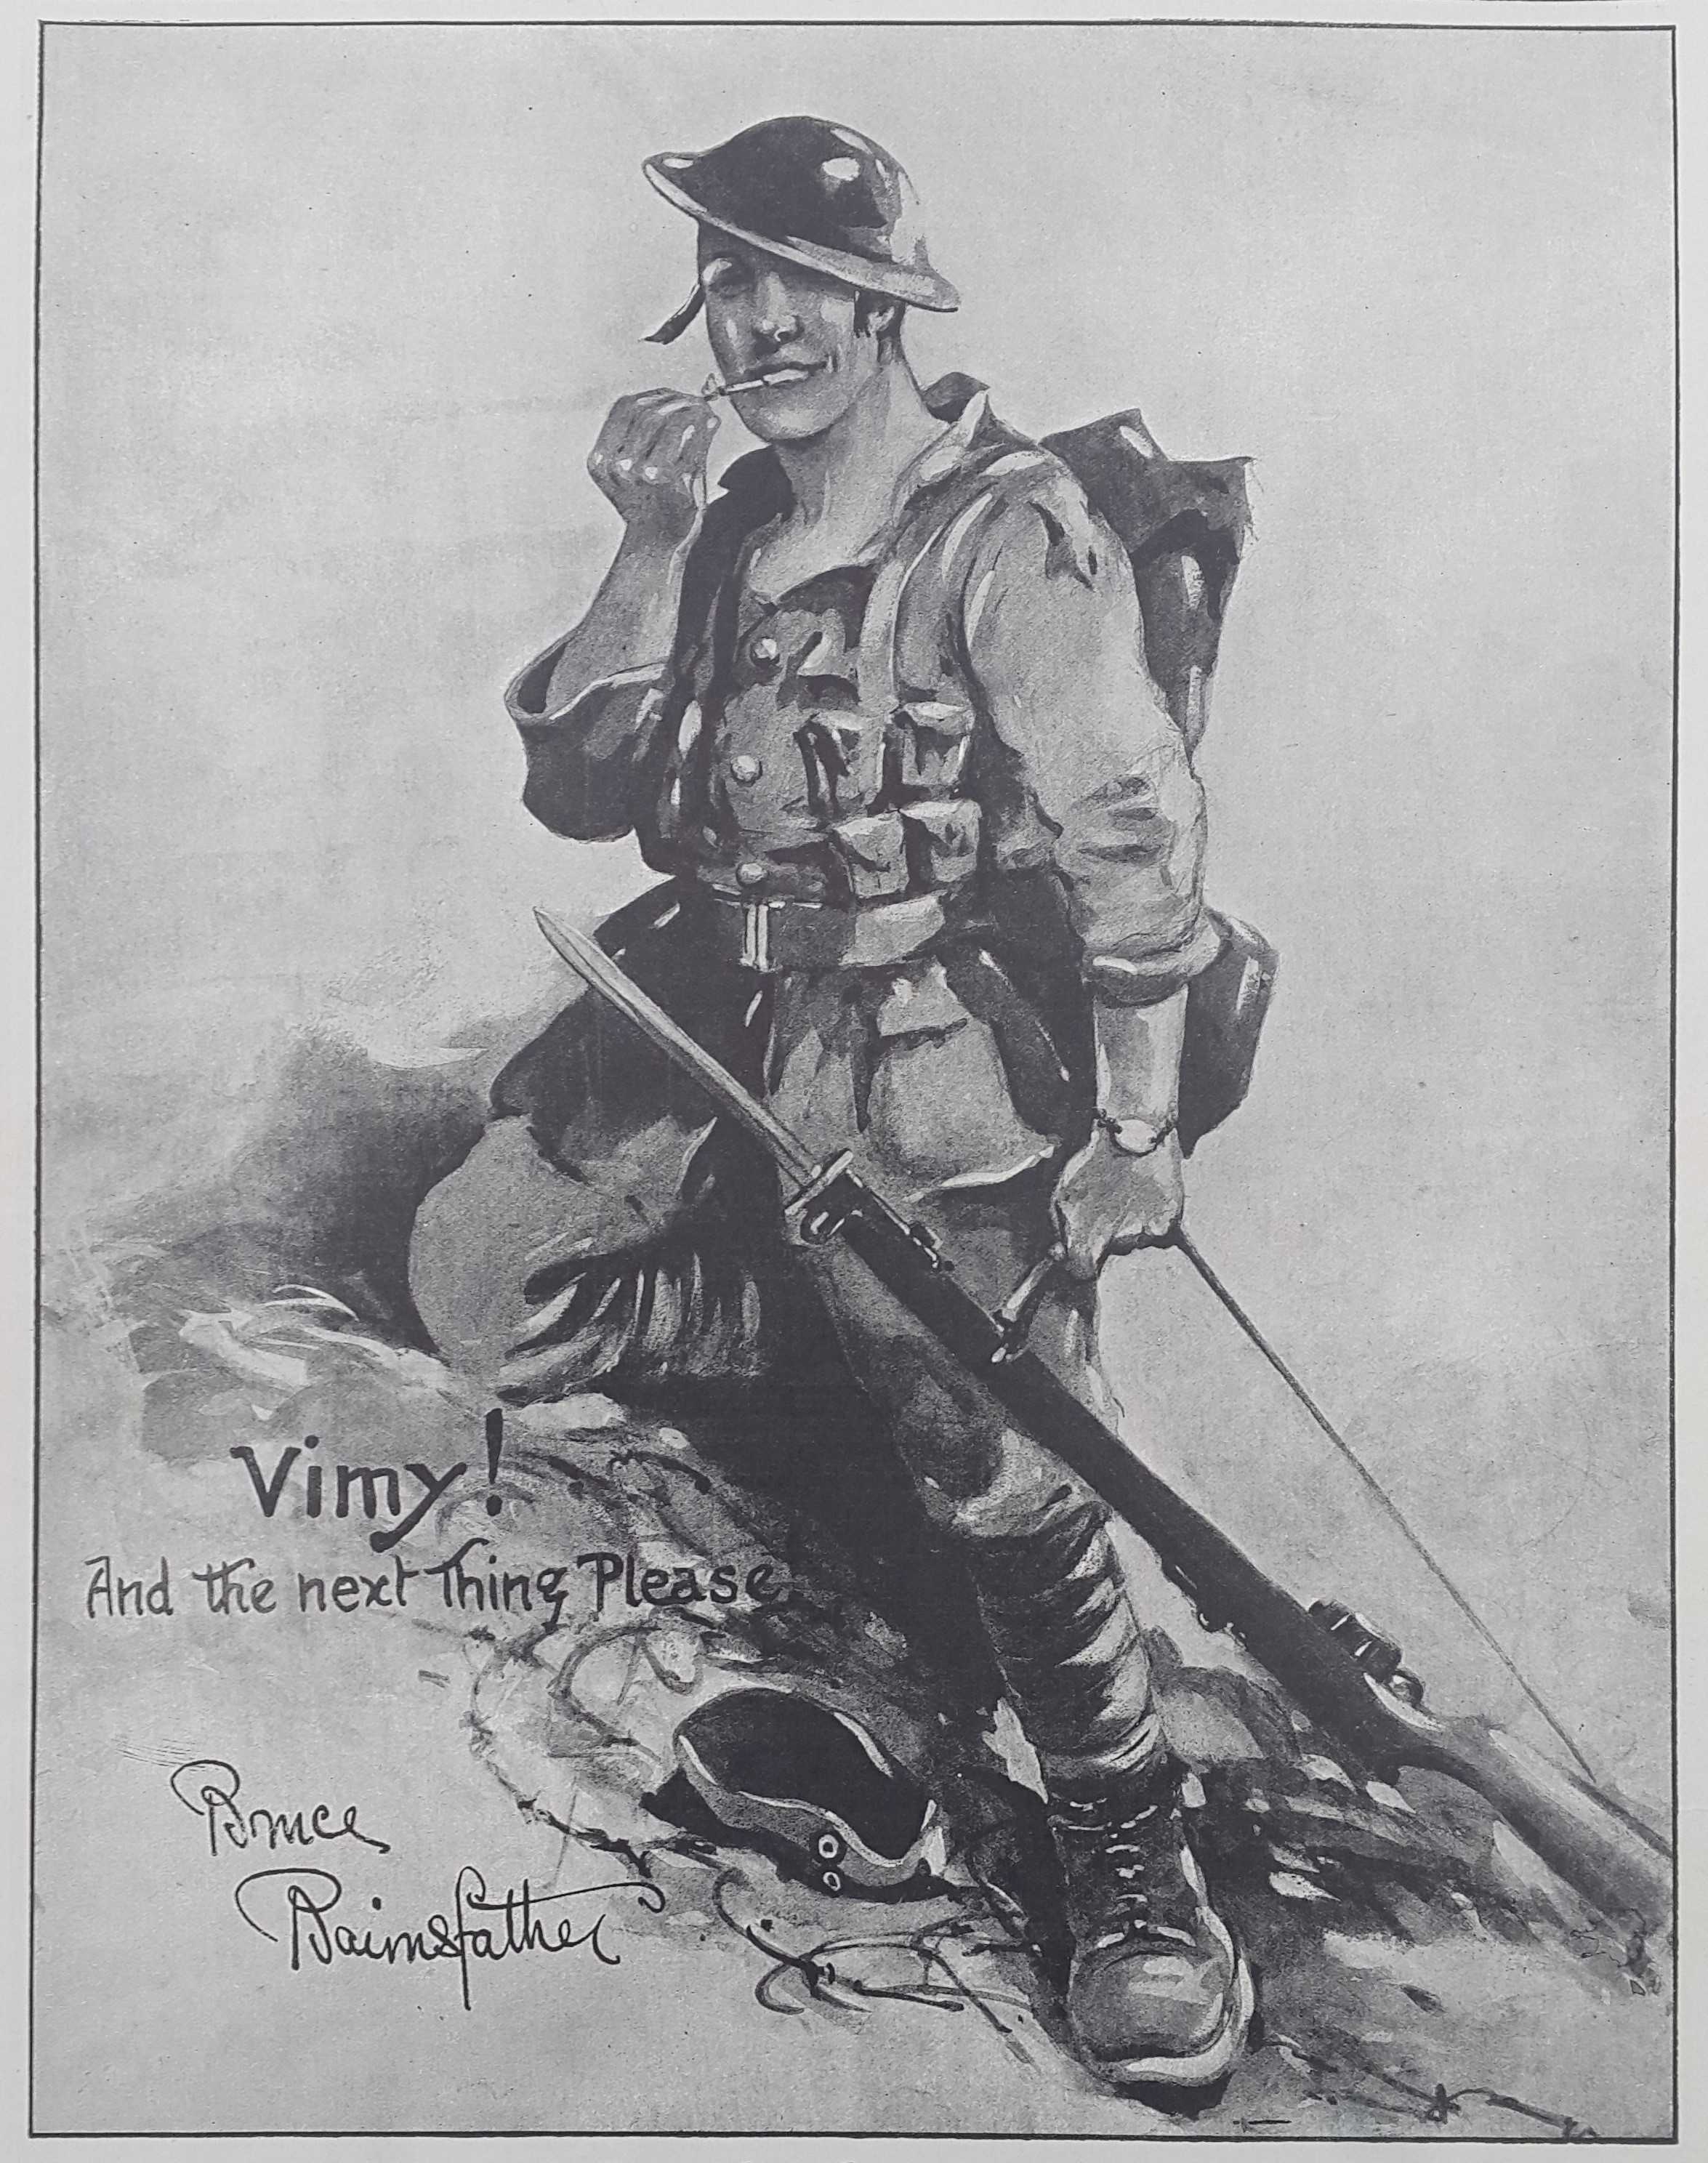 Hand-drawn cartoon, black and white. A soldier leans one knee into a rise in the ground, standing mostly upright. He holds his gun in his left hand by a strap. His helmet is tilted casually and his right hand holds a cigarette in his mouth.